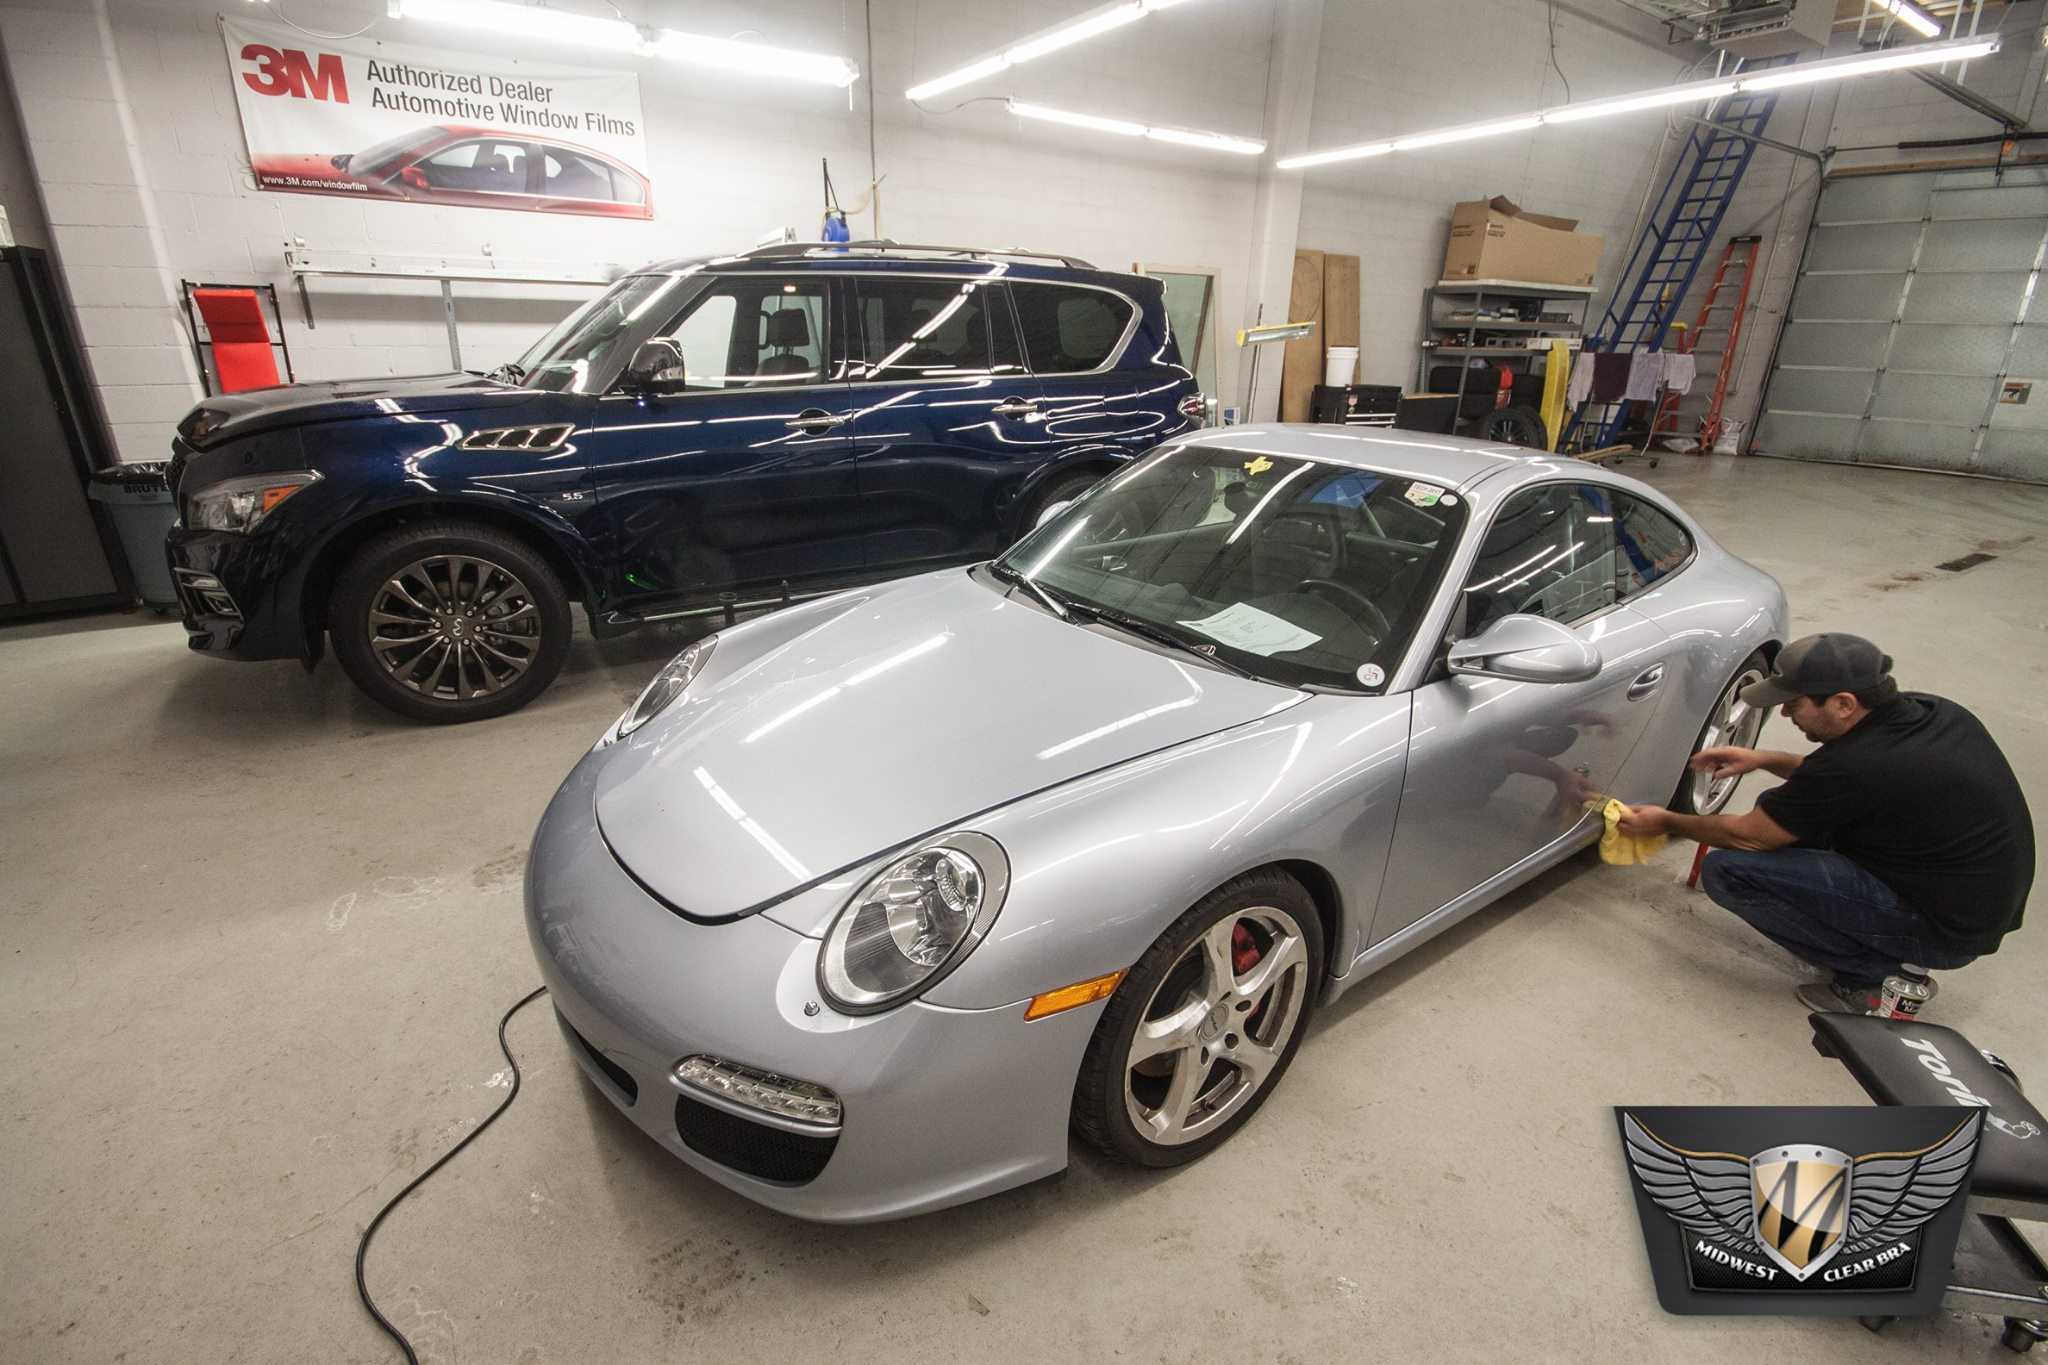 Porsche 911 Turbo S Protected with XPEL PPF, Window Tint & Ceramic Coating  - XPEL Scottsdale